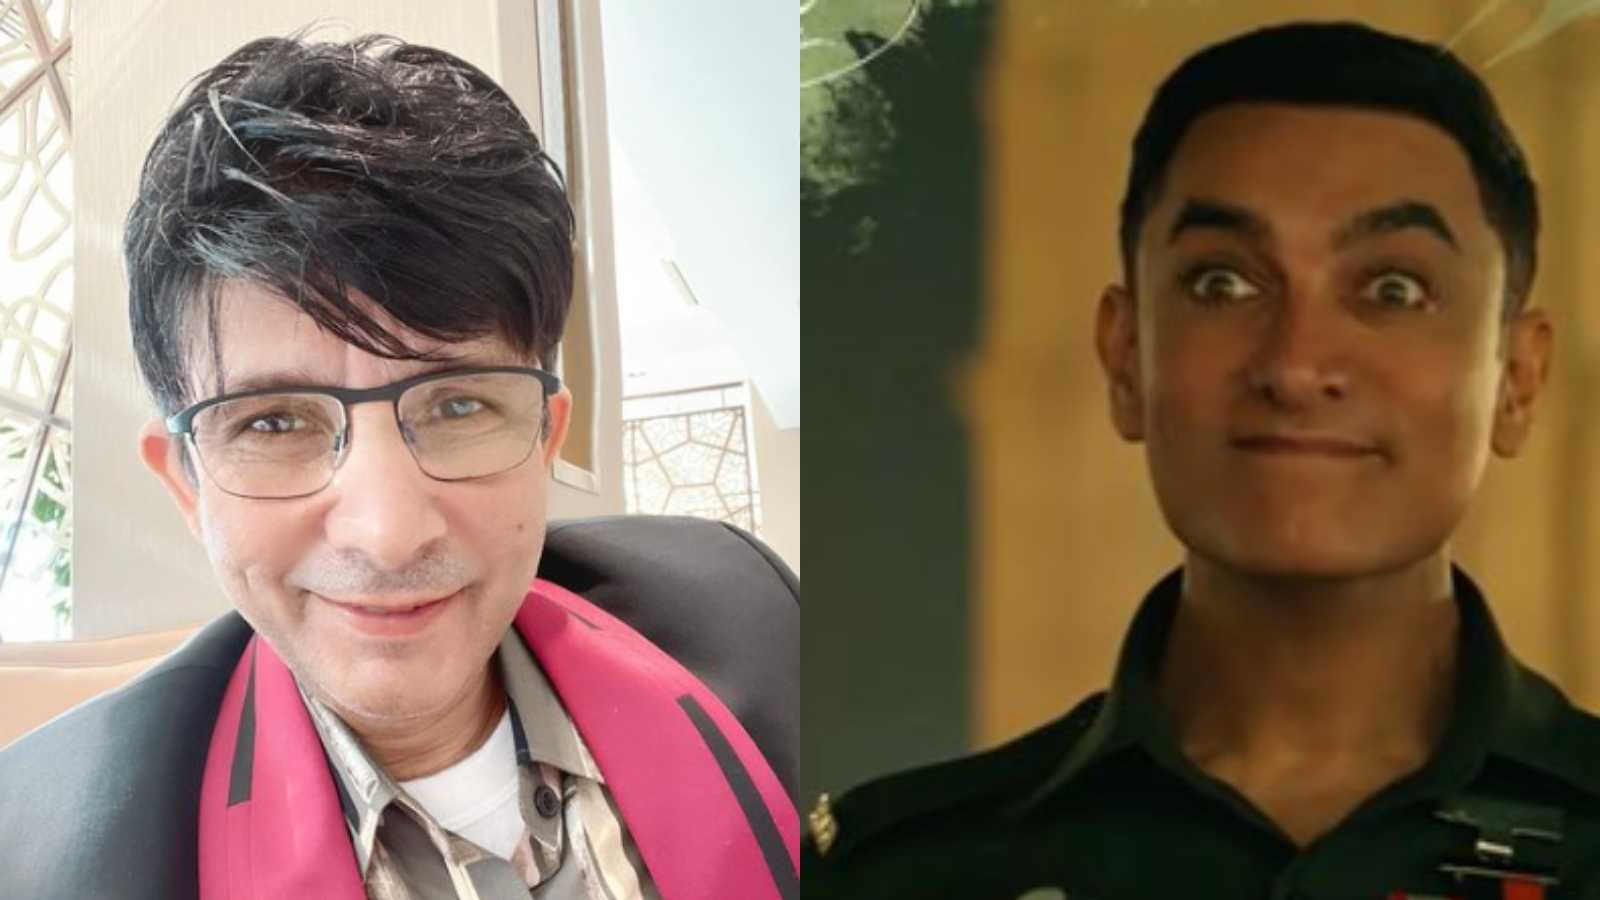 'Aamir Khan's film career is over' says KRK, predicts the same fate for Salman Khan and Shah Rukh Khan